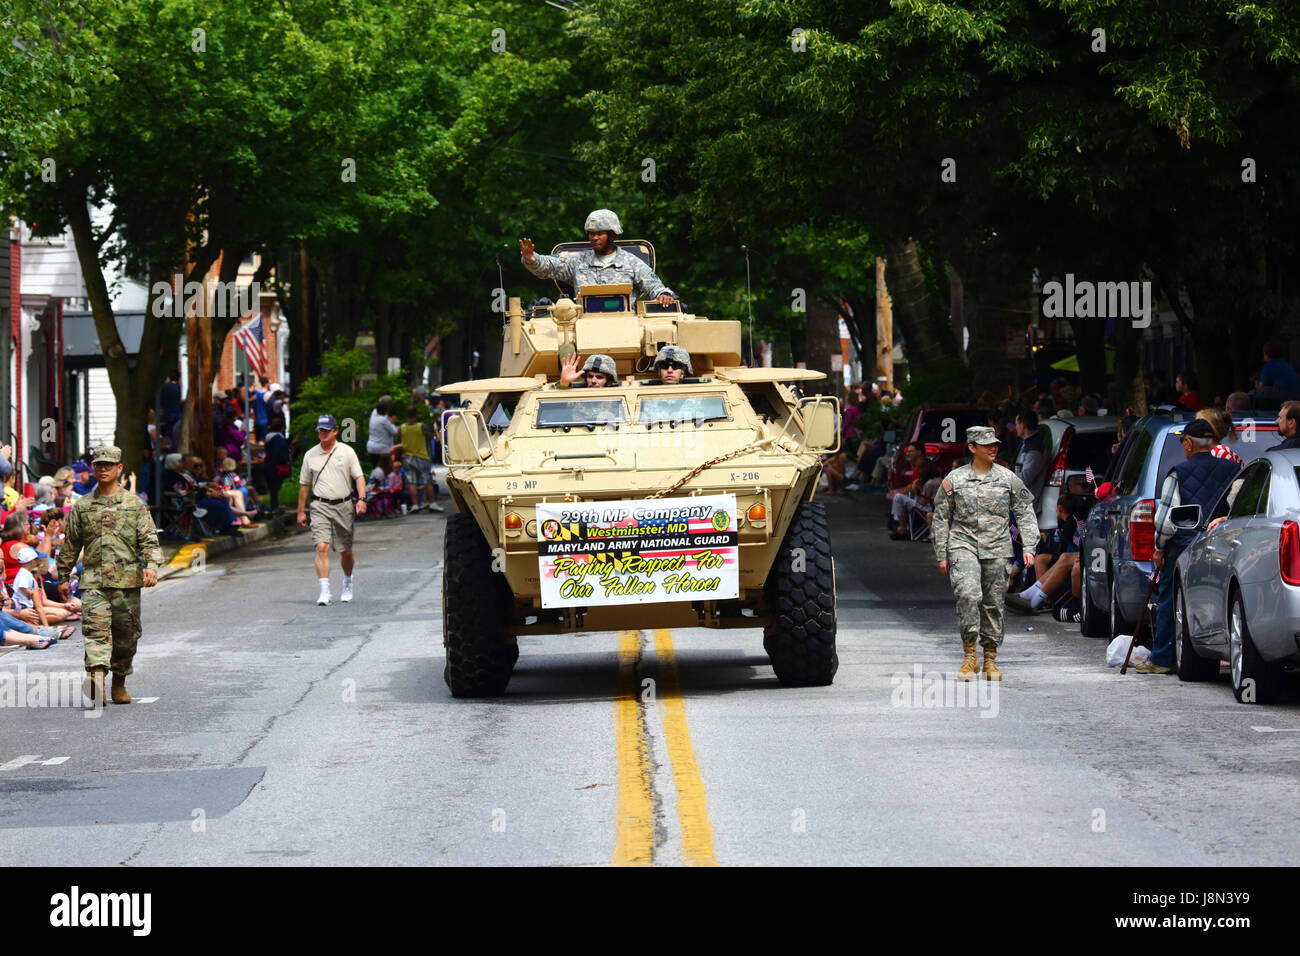 Westminster, Maryland, USA. 29th May, 2017. Members of the Maryland Army National Guard take part in parades for Memorial Day, a federal holiday in the United States for remembering those who died while serving in the country's armed forces. Credit: James Brunker/Alamy Live News Stock Photo